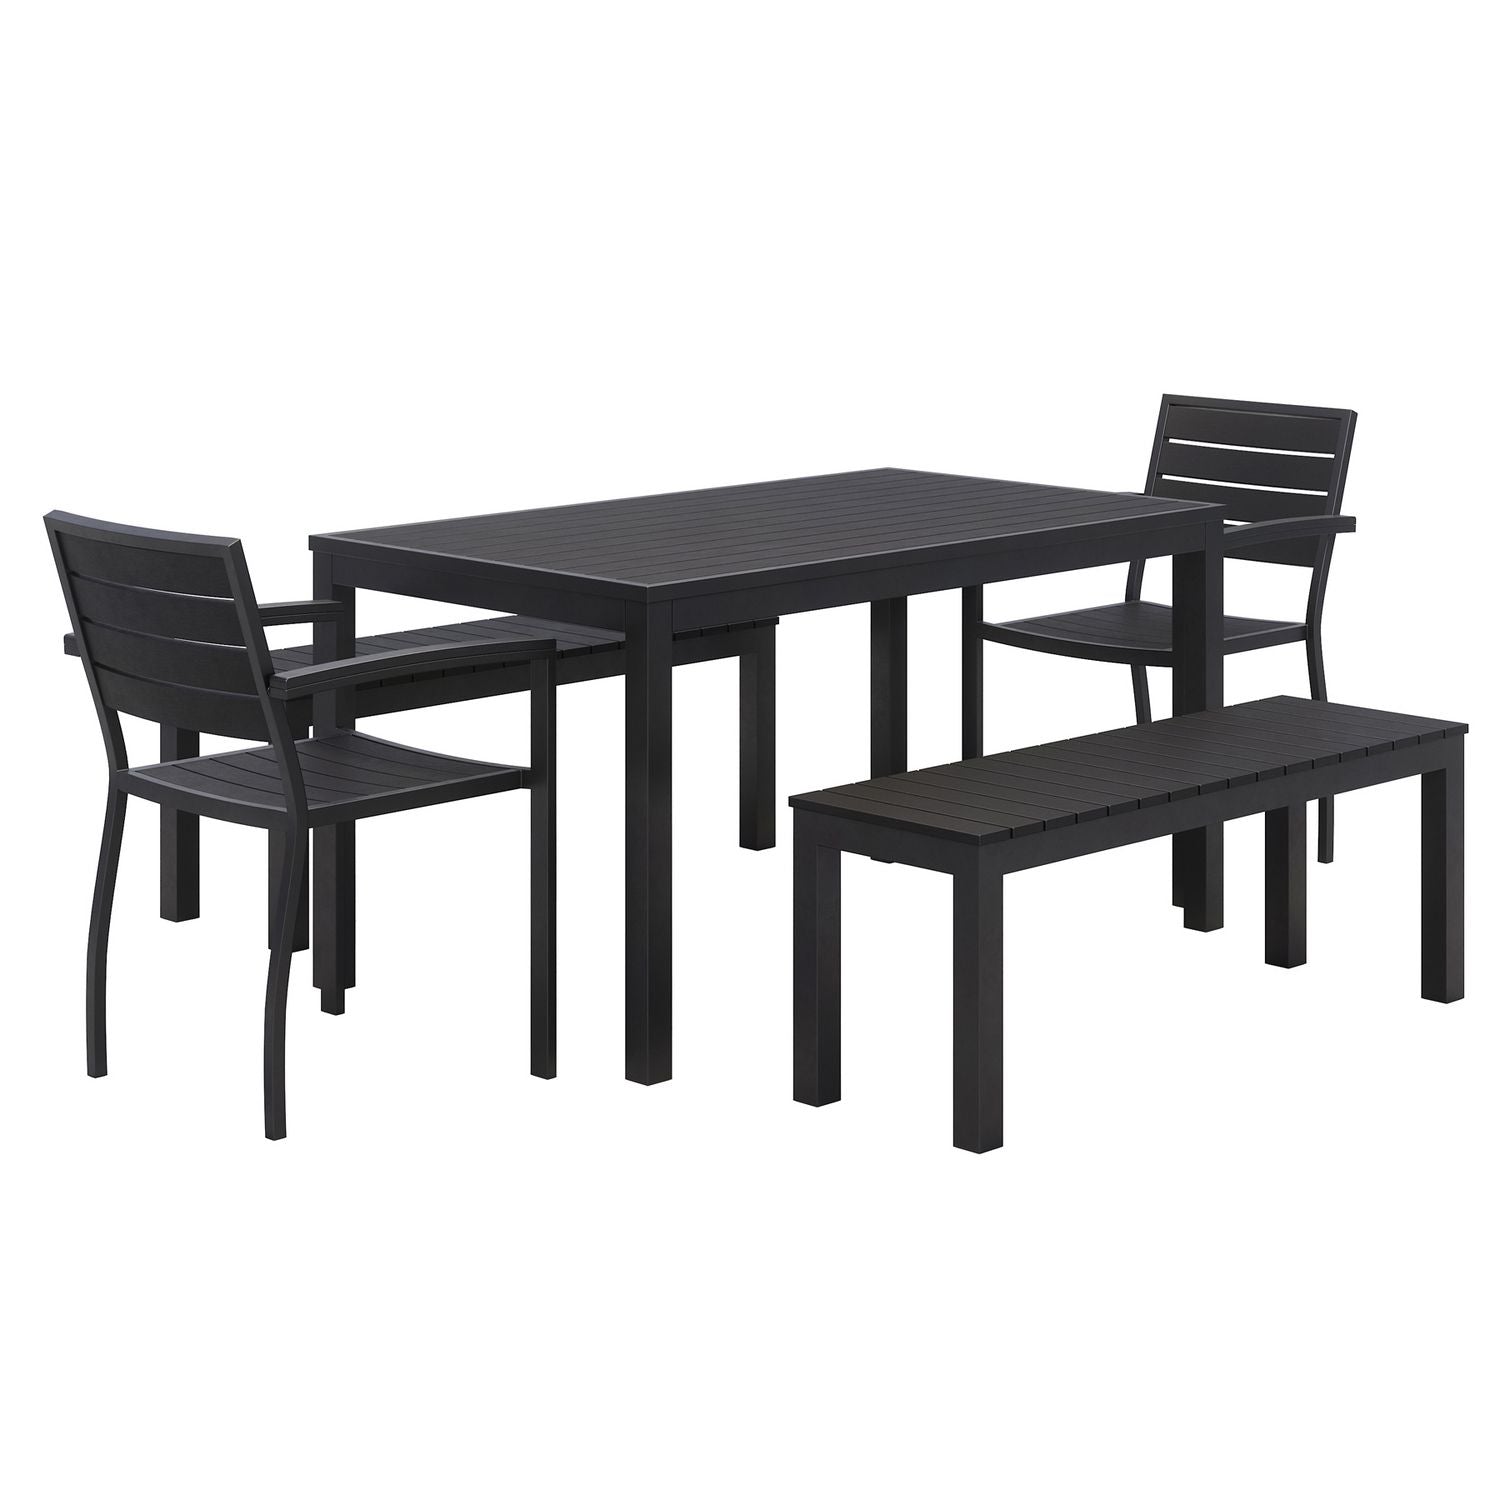 eveleen-outdoor-patio-table-w-two-black-powder-coated-polymer-chairs-and-two-benches-32-x-55-gray-ships-in-4-6-bus-days_kfi840031925152 - 1